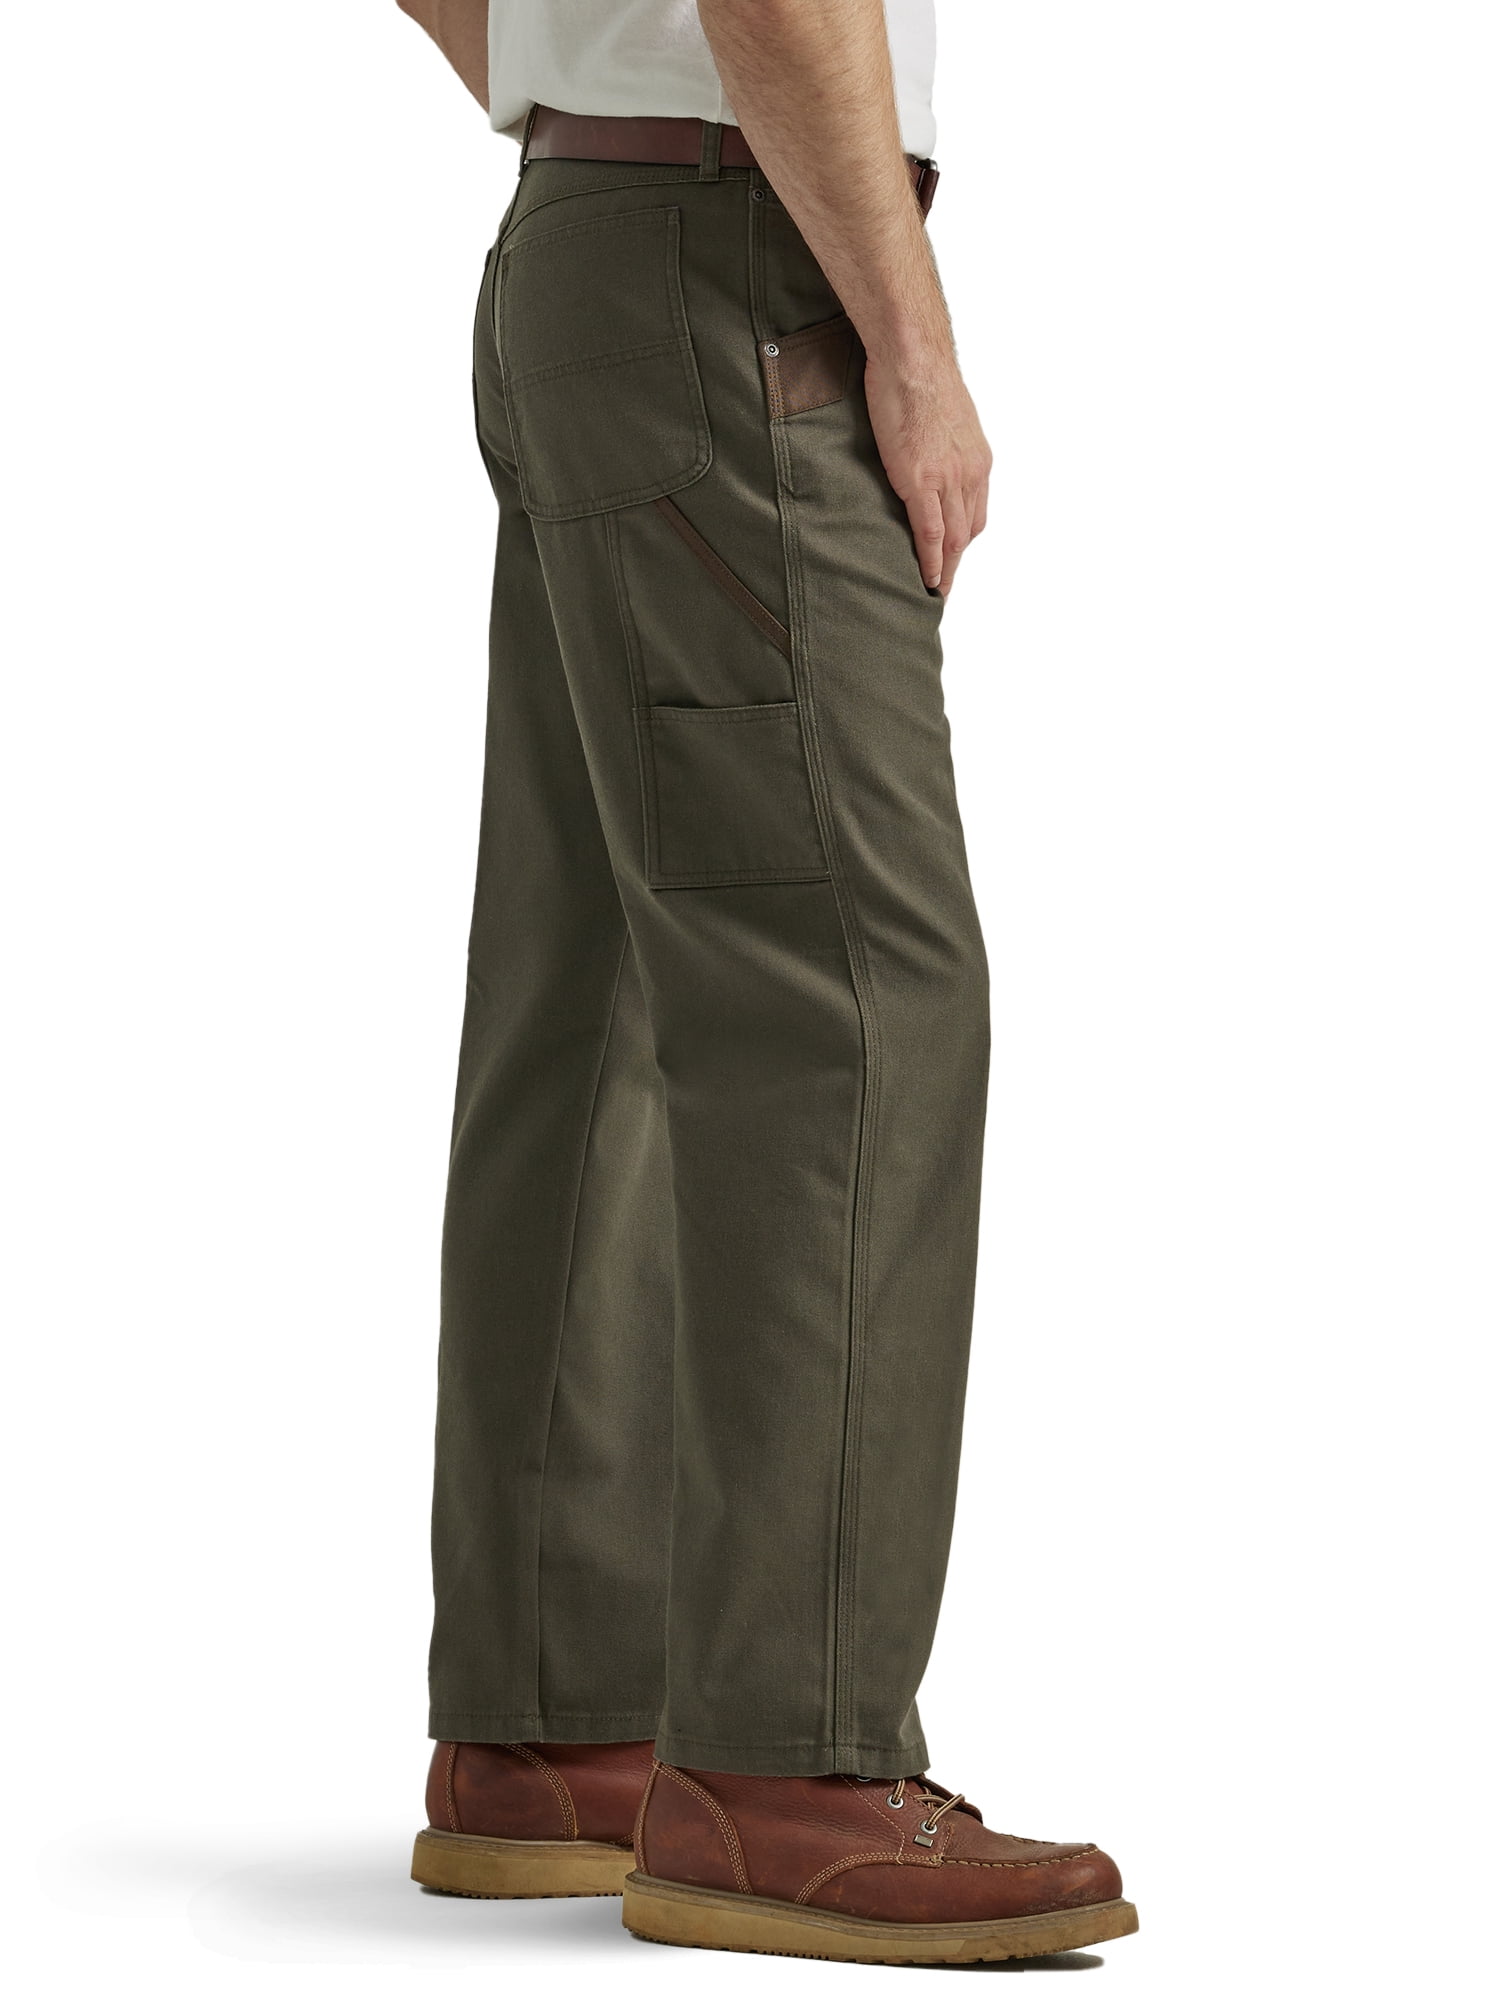 Wrangler® Men's Workwear Relaxed Fit Utility Pant with Multi Utility  Pockets, Sizes 32-44